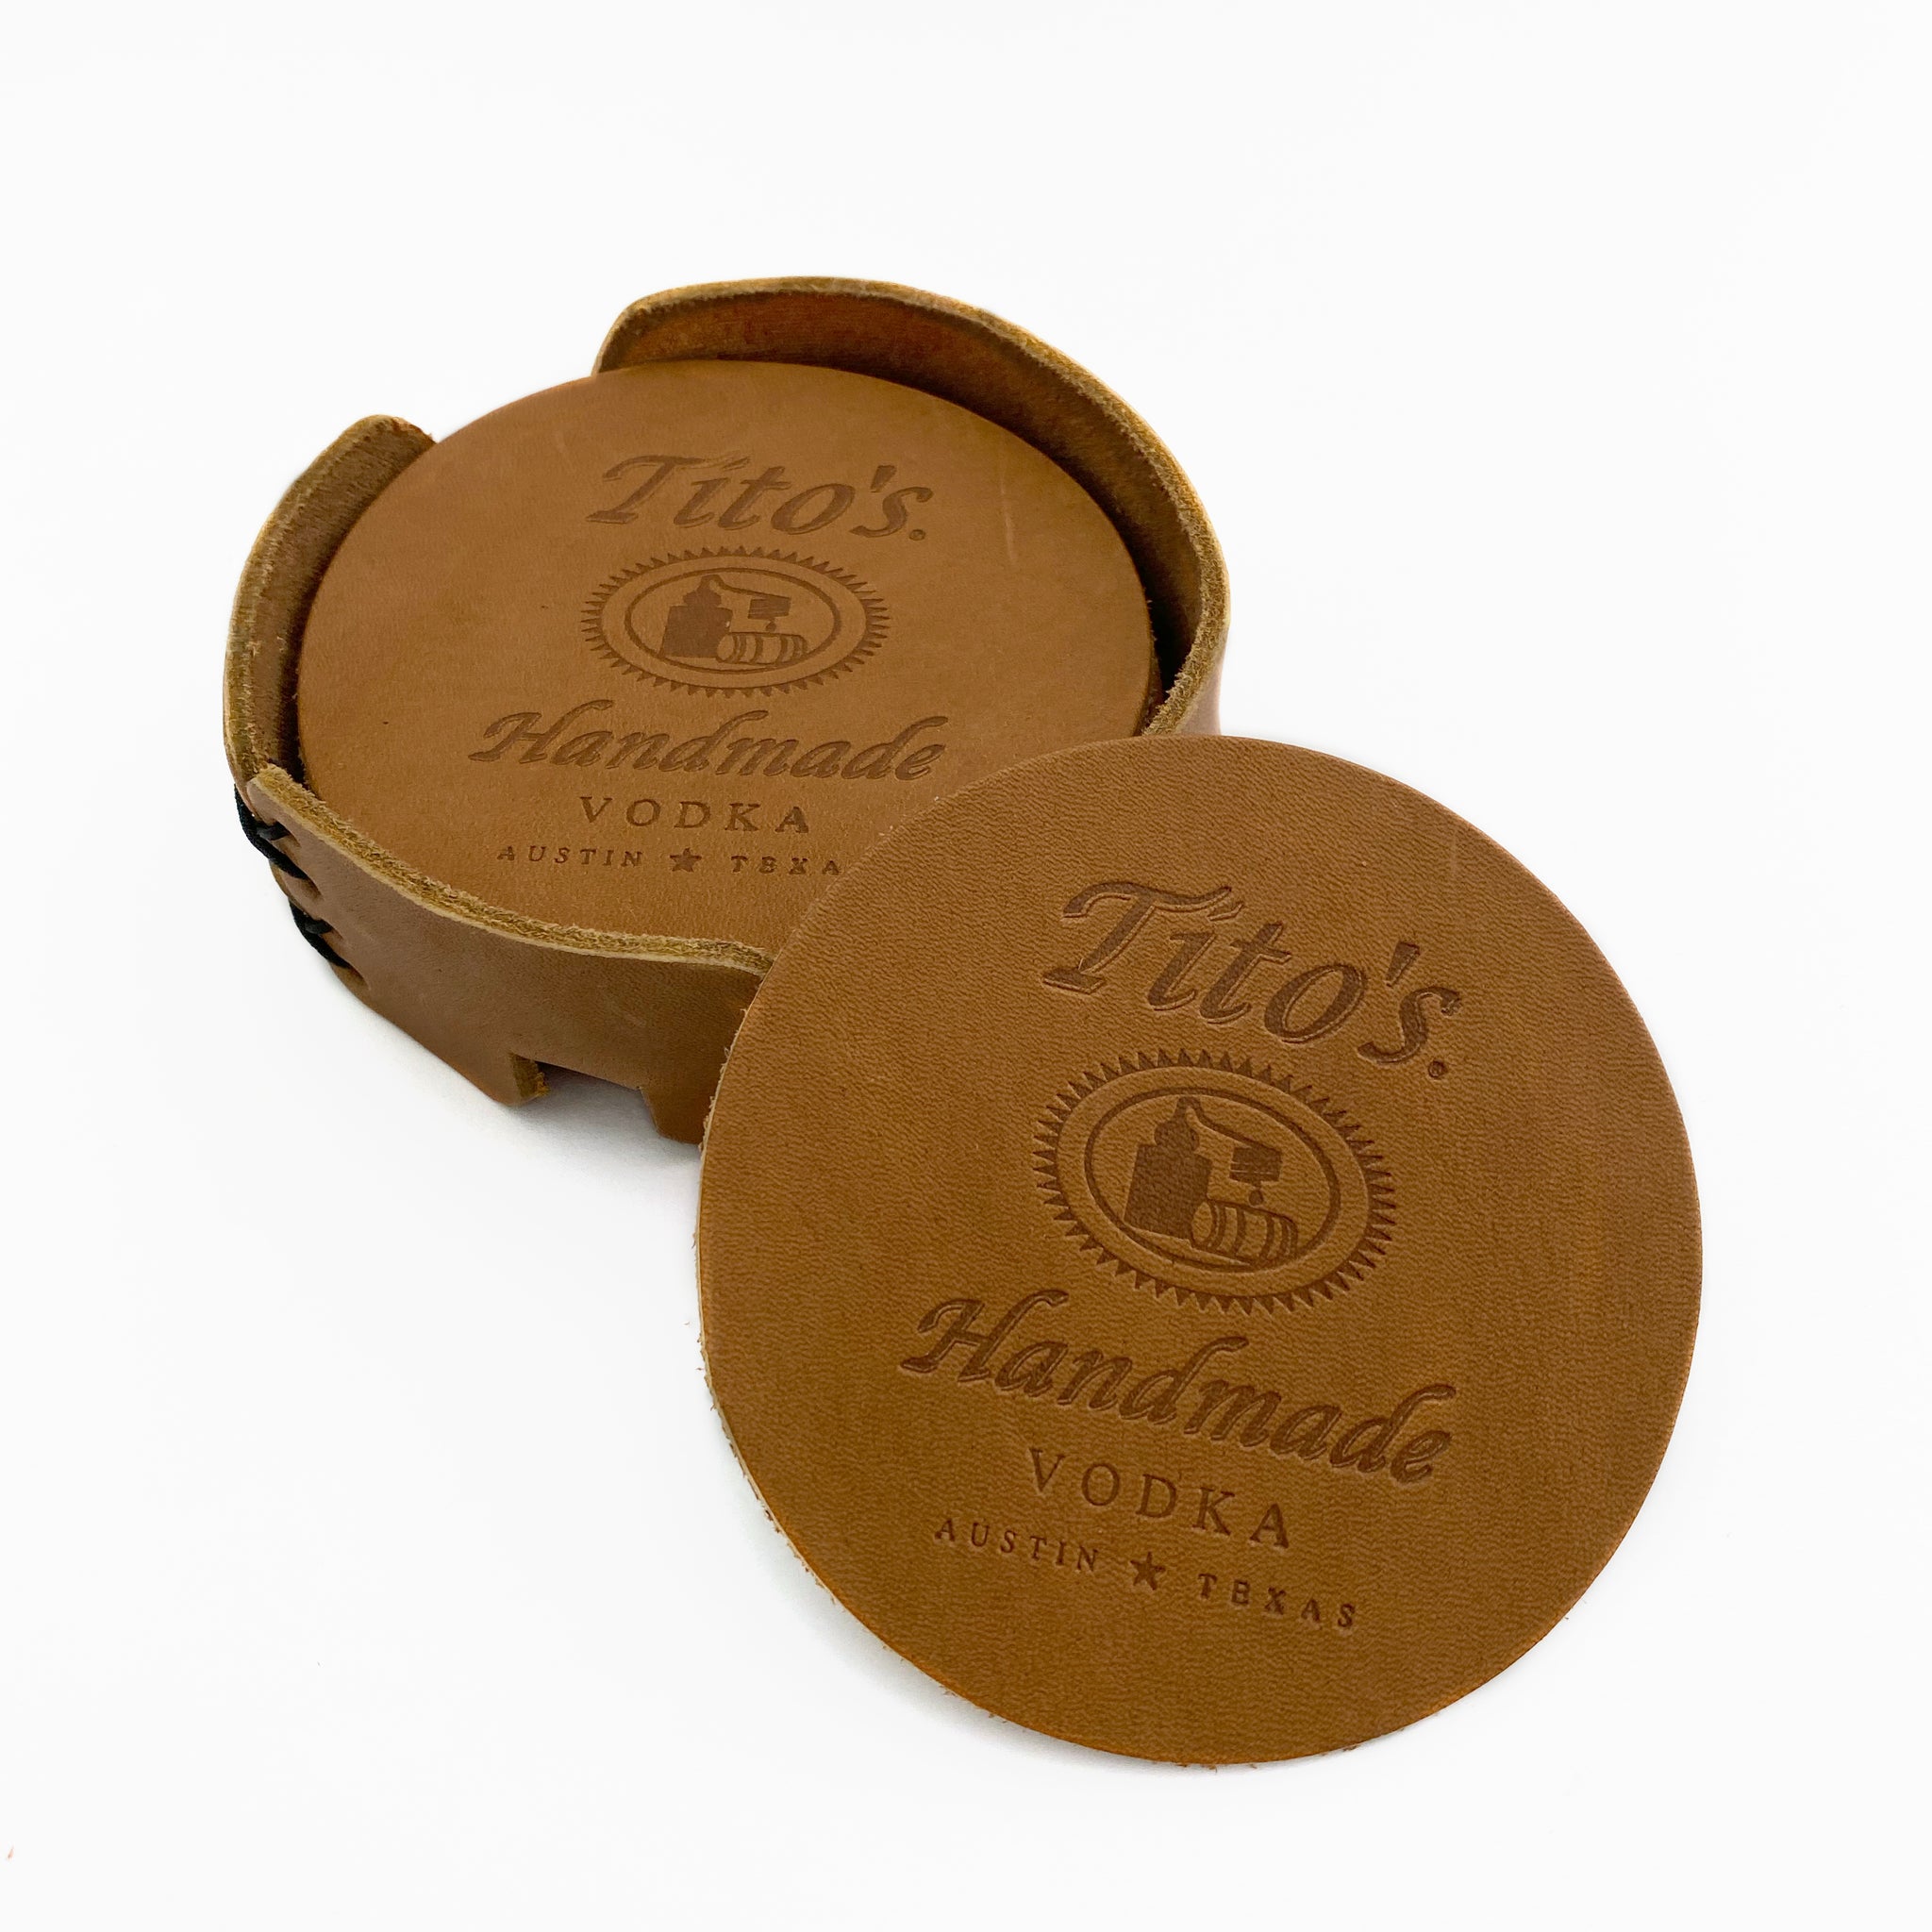 Set of leather coasters branded with Tito’s Handmade Vodka logo and coaster holder